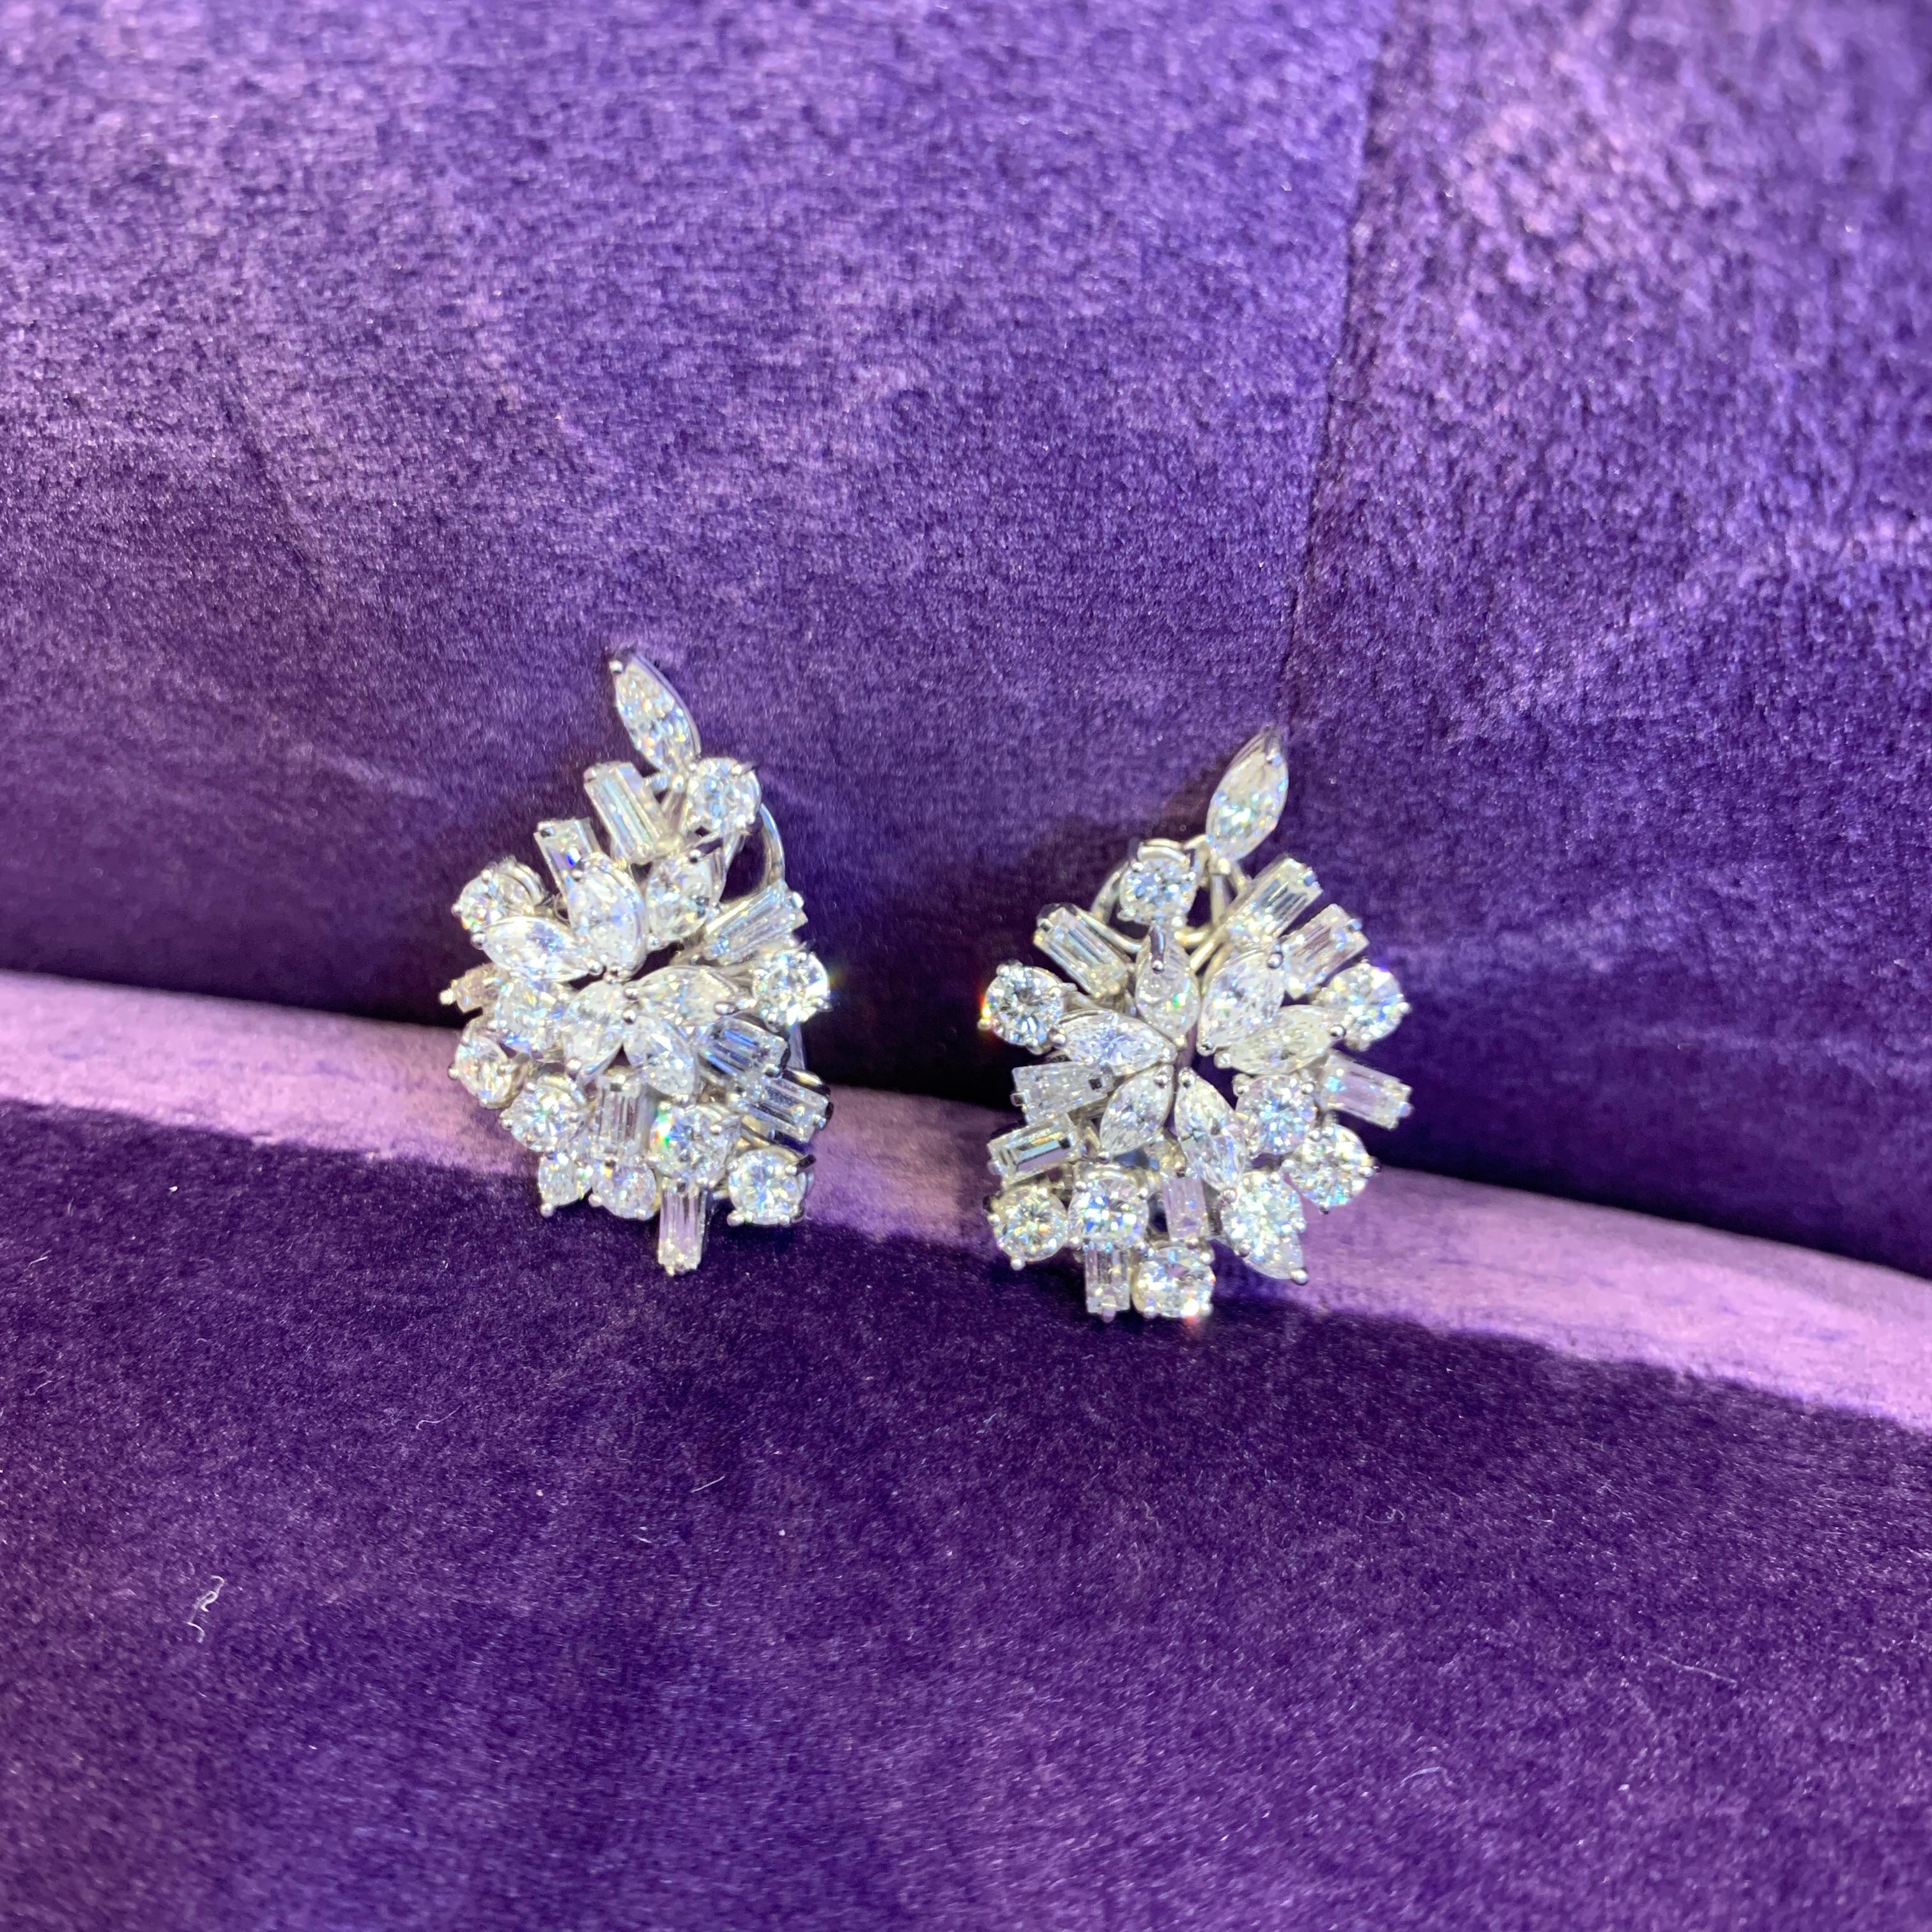 Mixed Cut Diamond Earrings In Excellent Condition For Sale In New York, NY